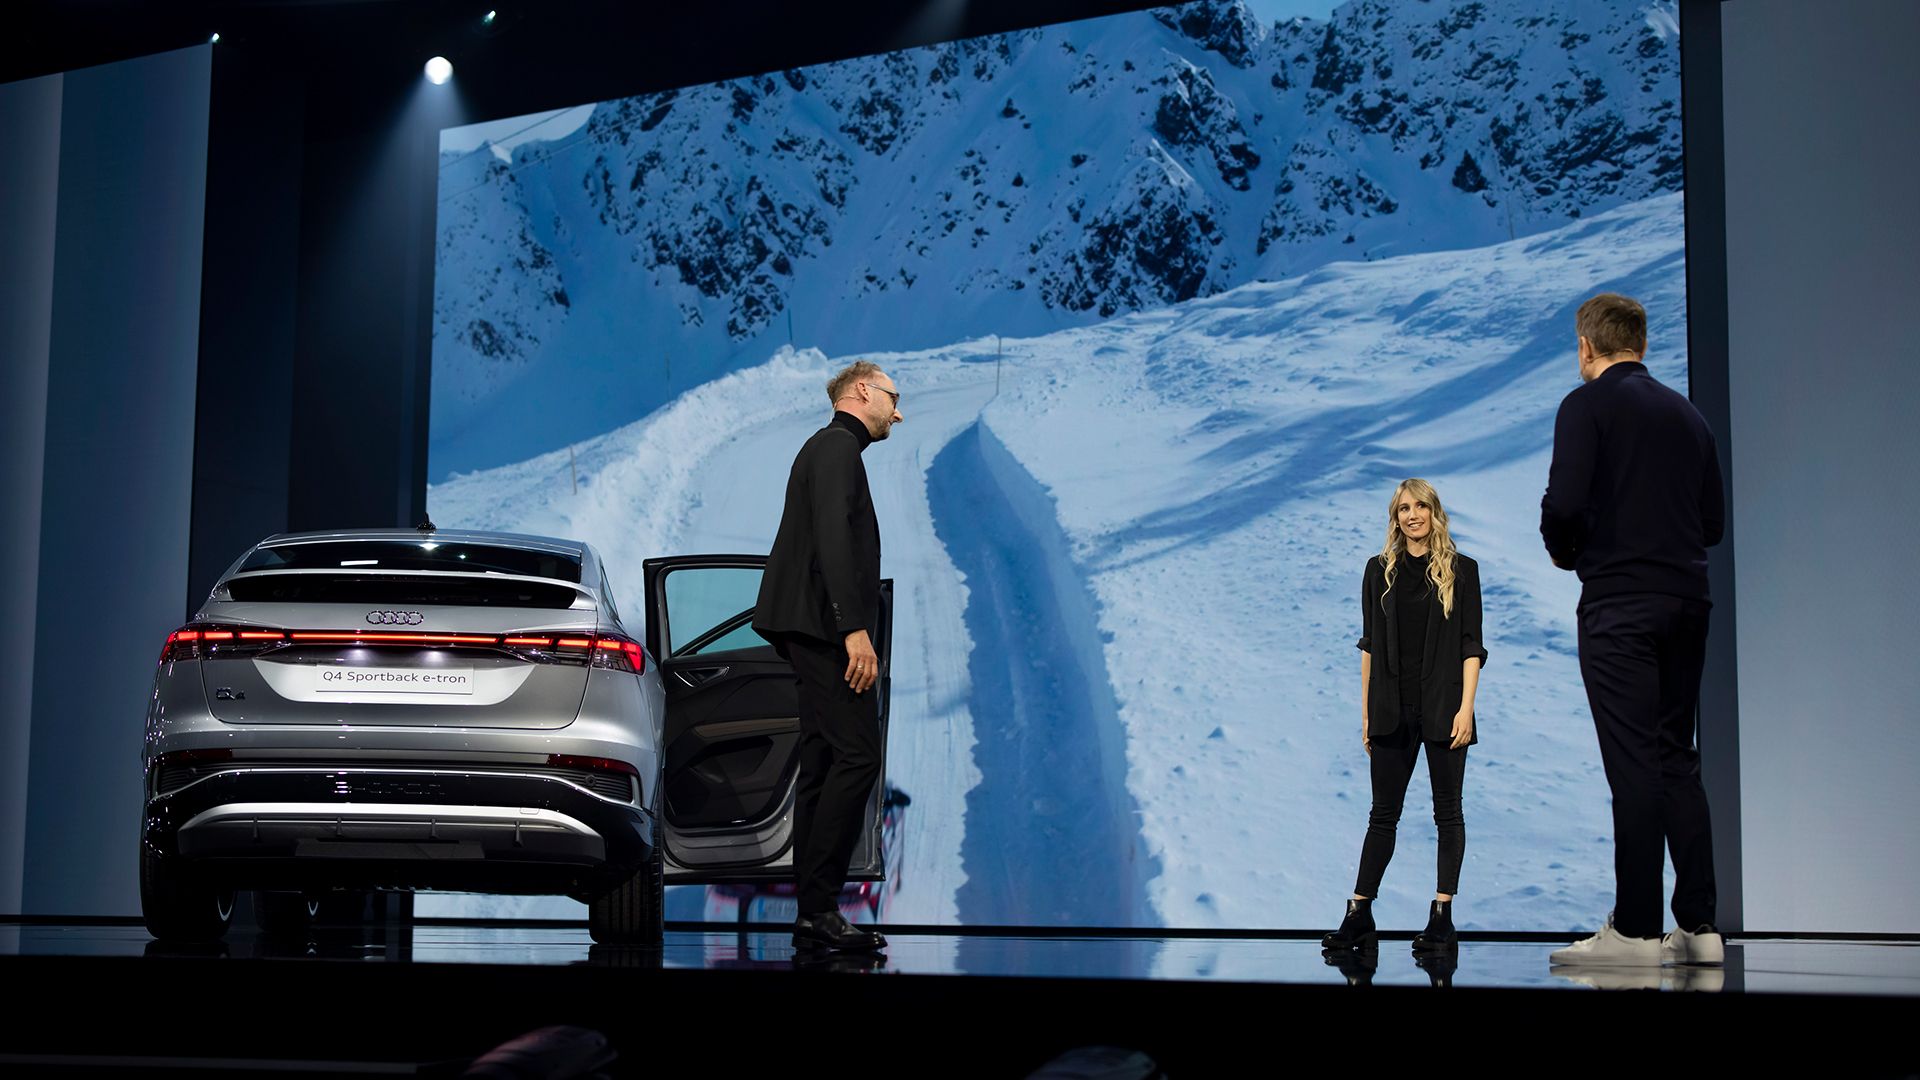 Anna Gasser stands on the stage with Marc Lichte and Steven Gätjen. A snow-covered landscape can be seen on the screen in the background.